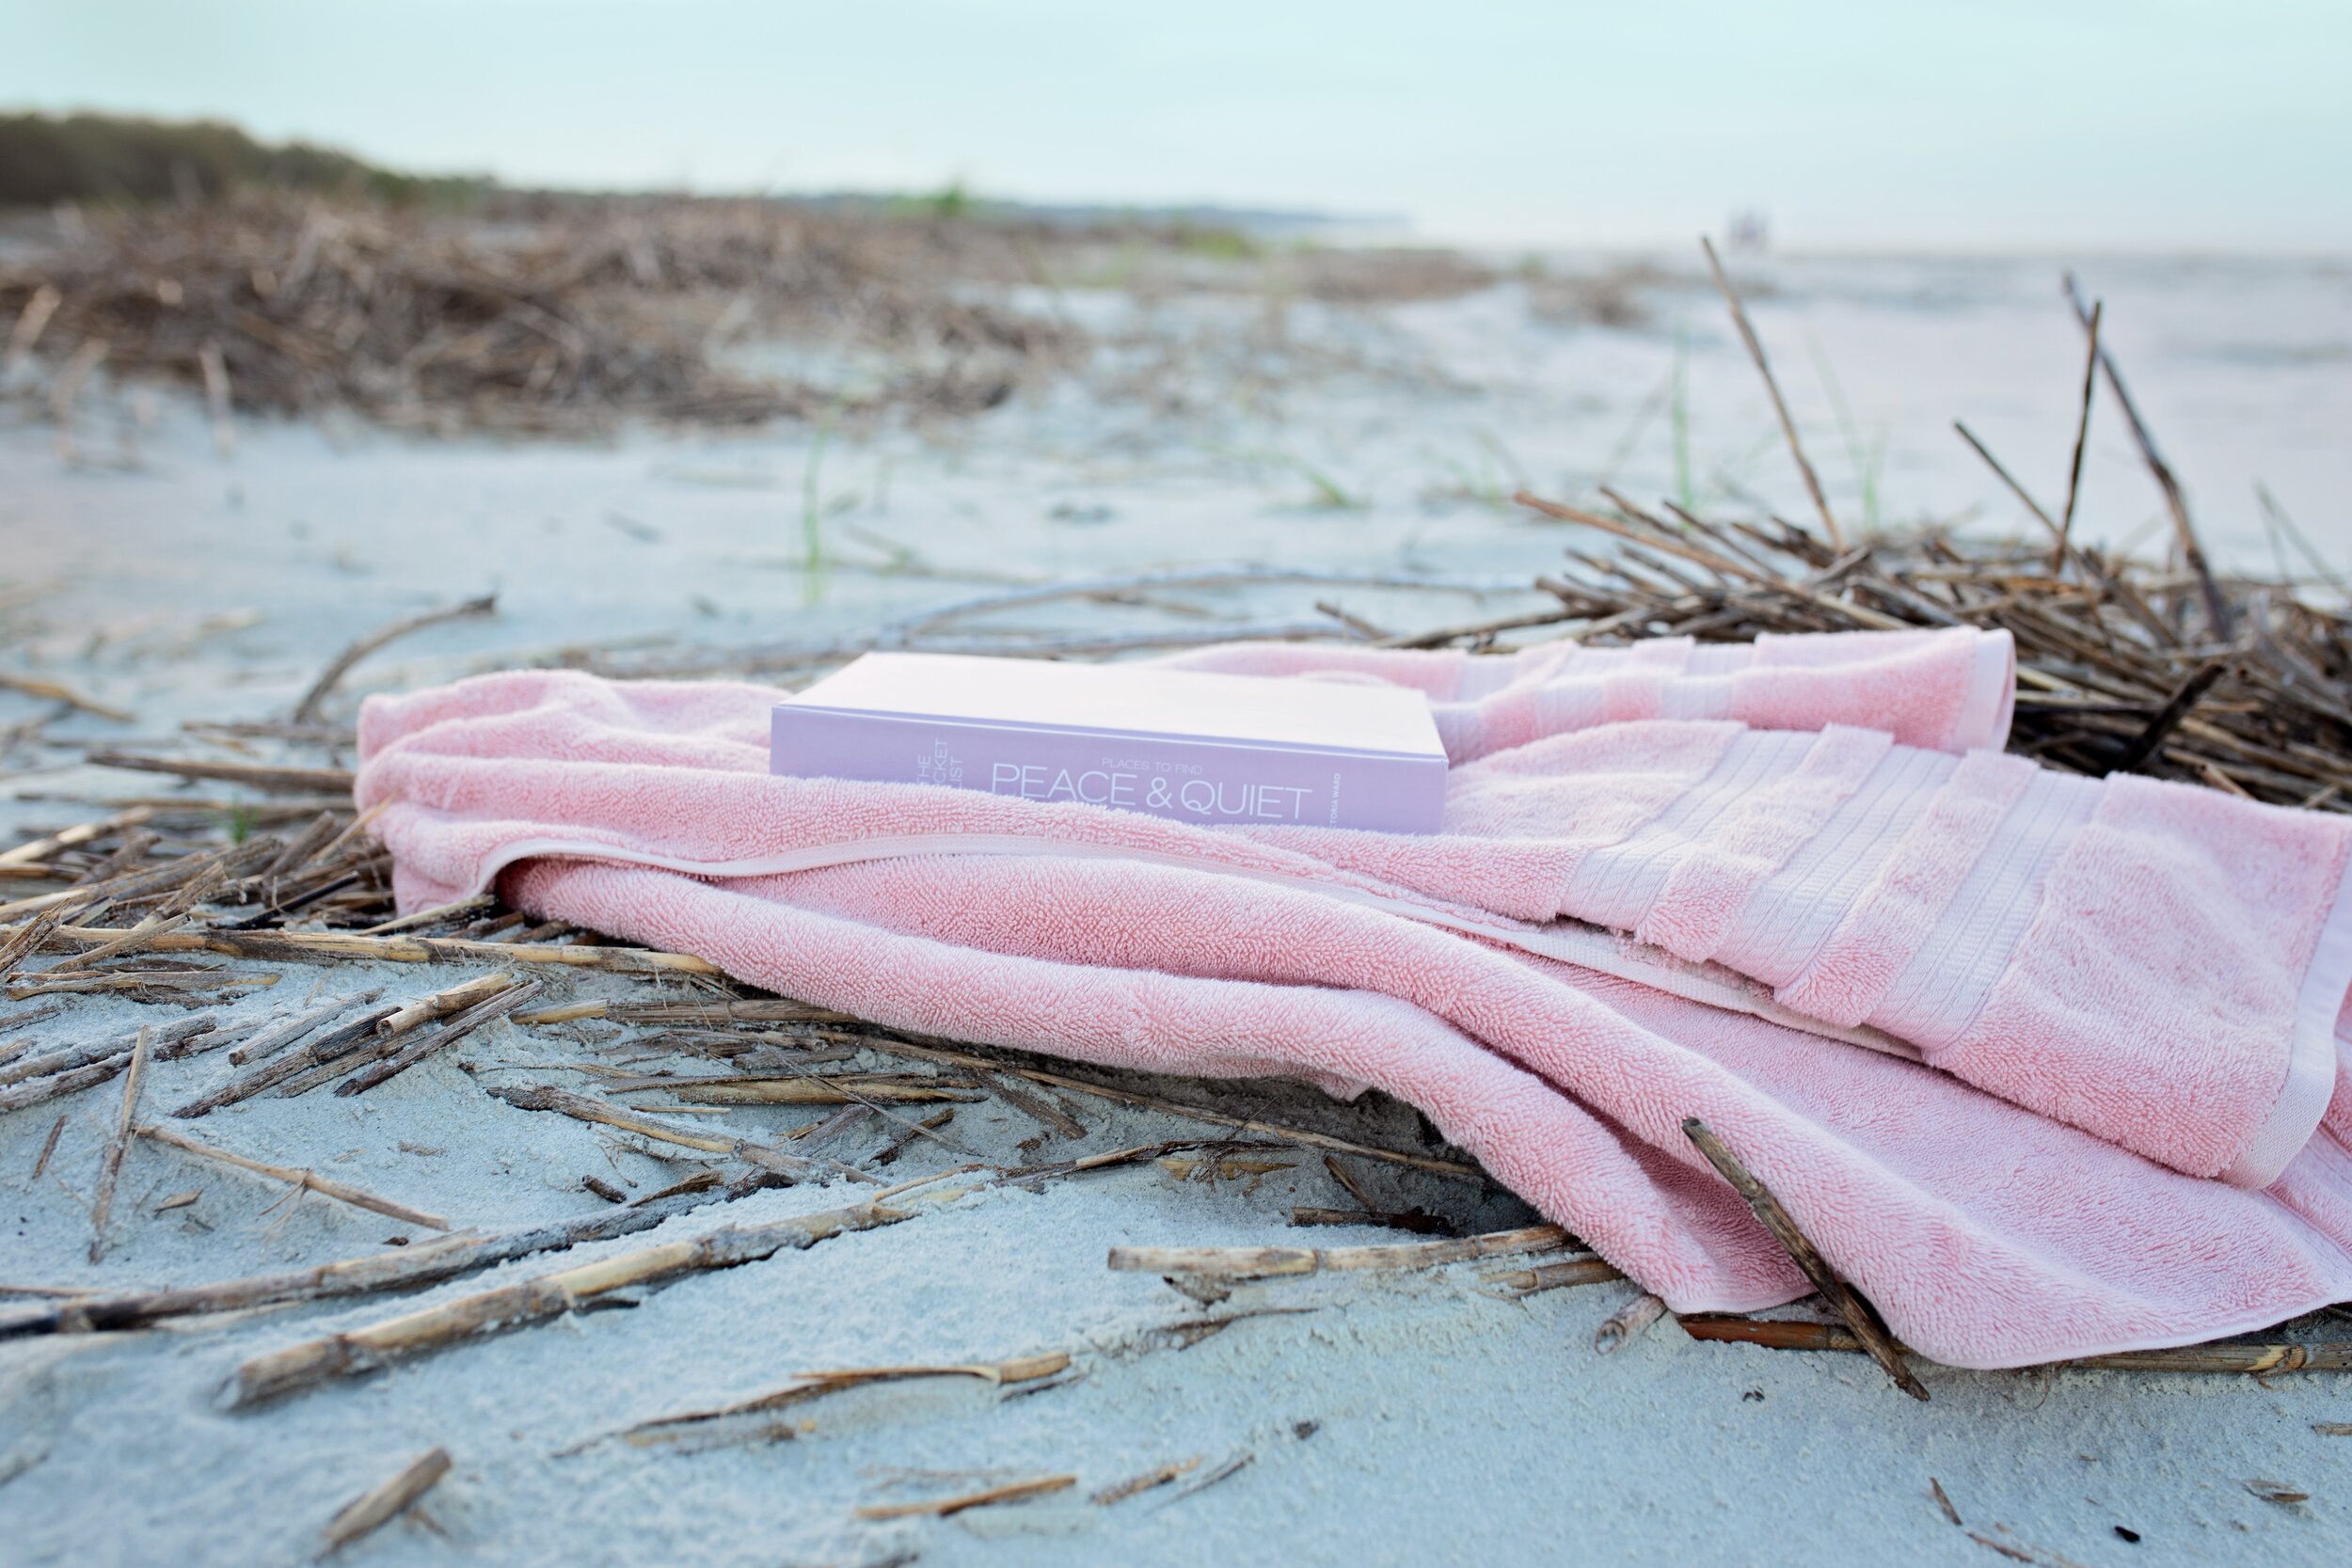 book-on-pink-textile-on-sand-during-day-2997957.jpg